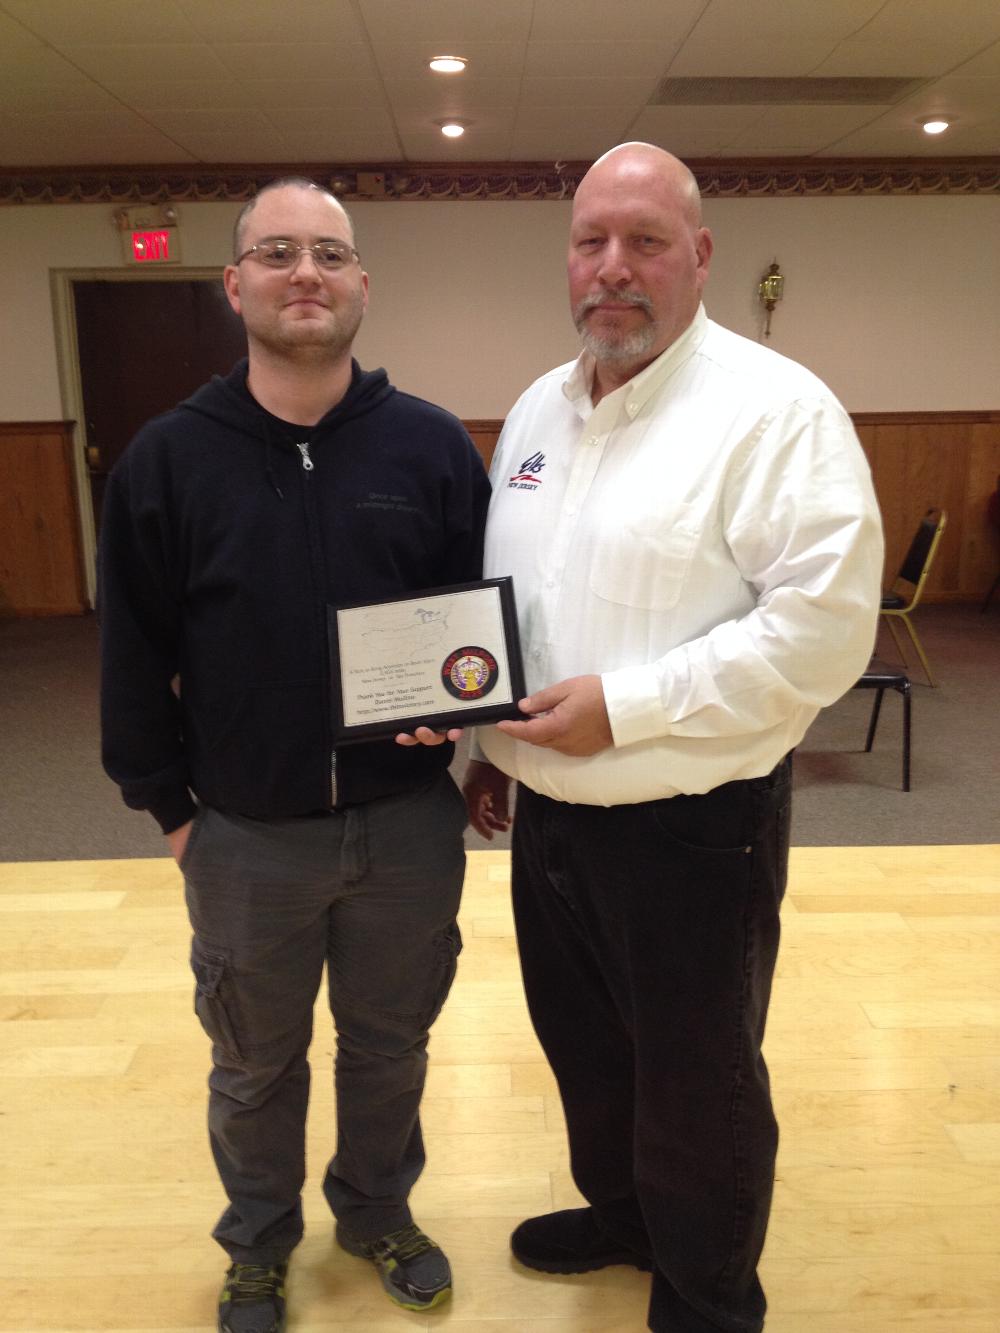 Plaque presented to WM Elks' ER Otis Asmus from member Daniel Mollino who trekked crossed the country for awareness of Traumatic Brain Injury.